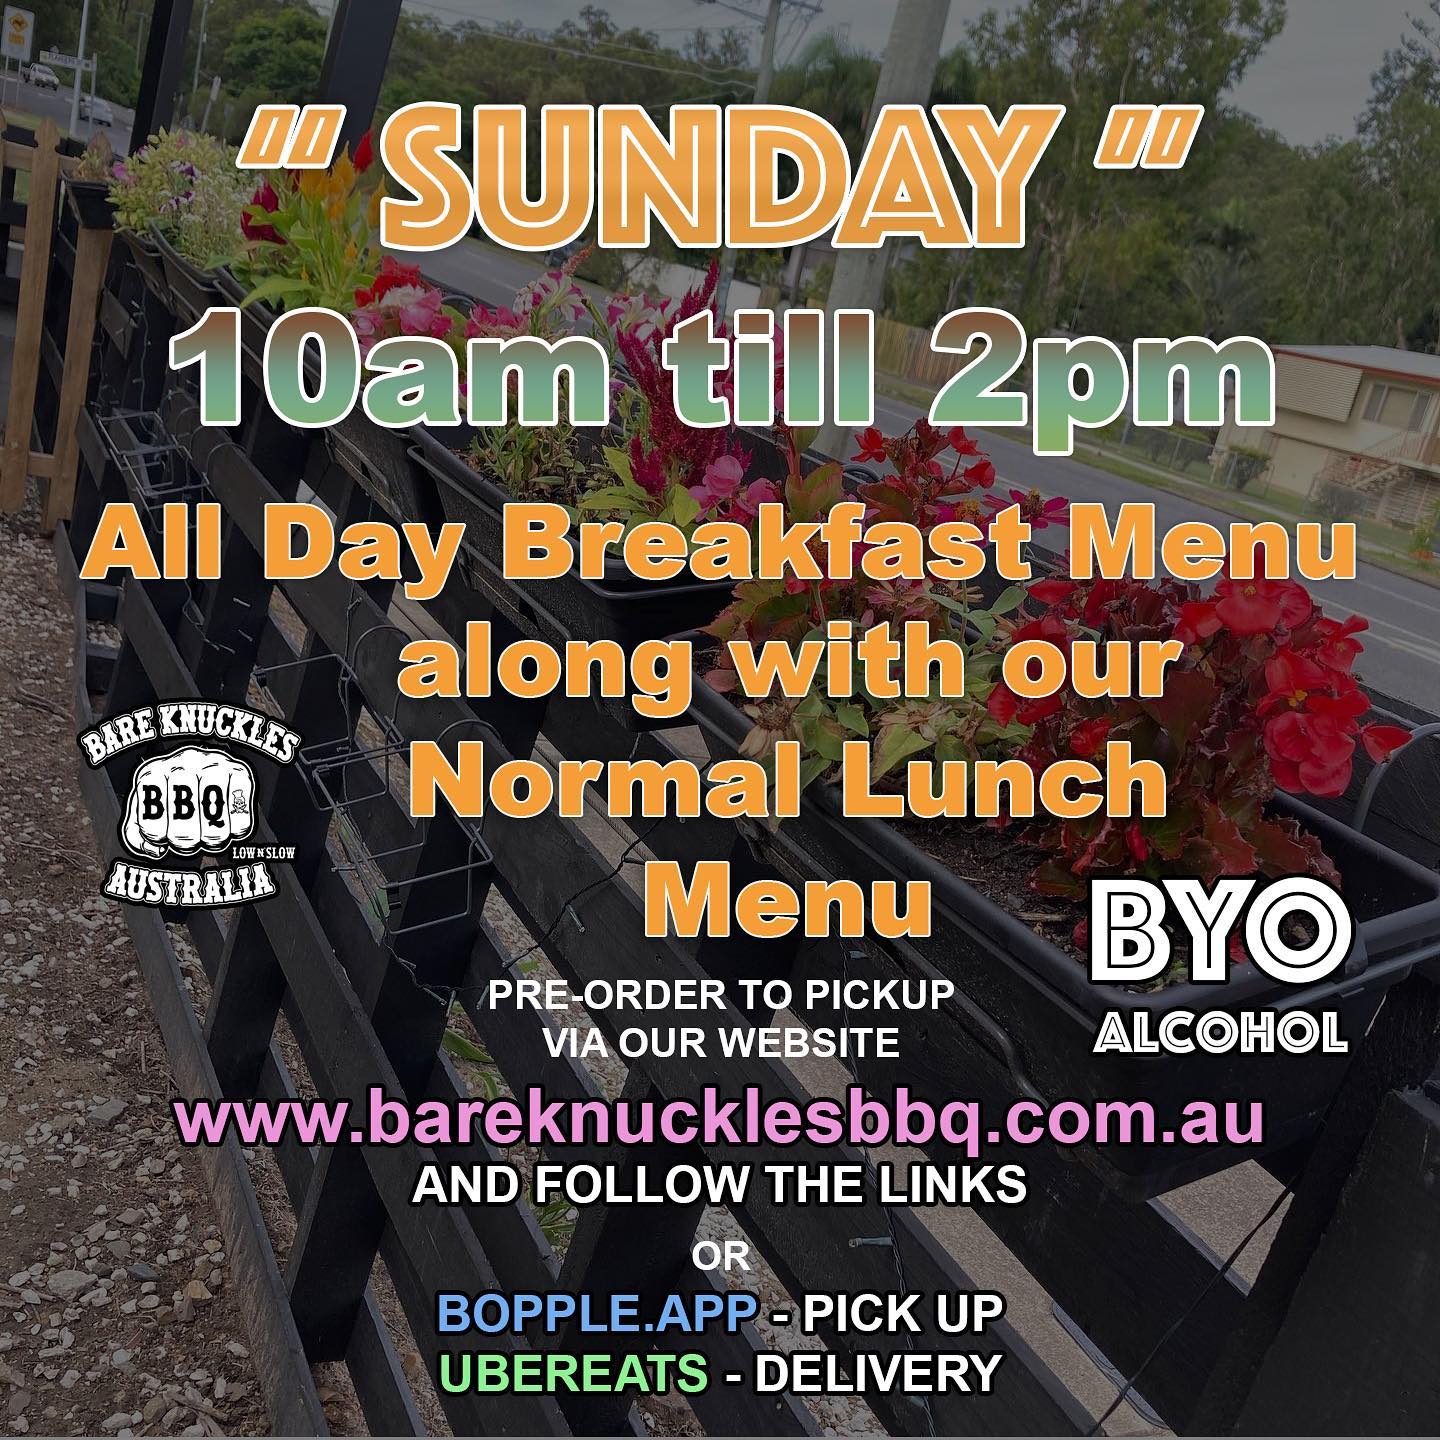 Sunday - Note: No early Breakfast.. but you can get Breakfast ALL DAY from 10am till 2pm - along with our standard Menu ! Great Coffee and Desserts too ! 617 Toohey Rd, Salisbury, Qld 🏻